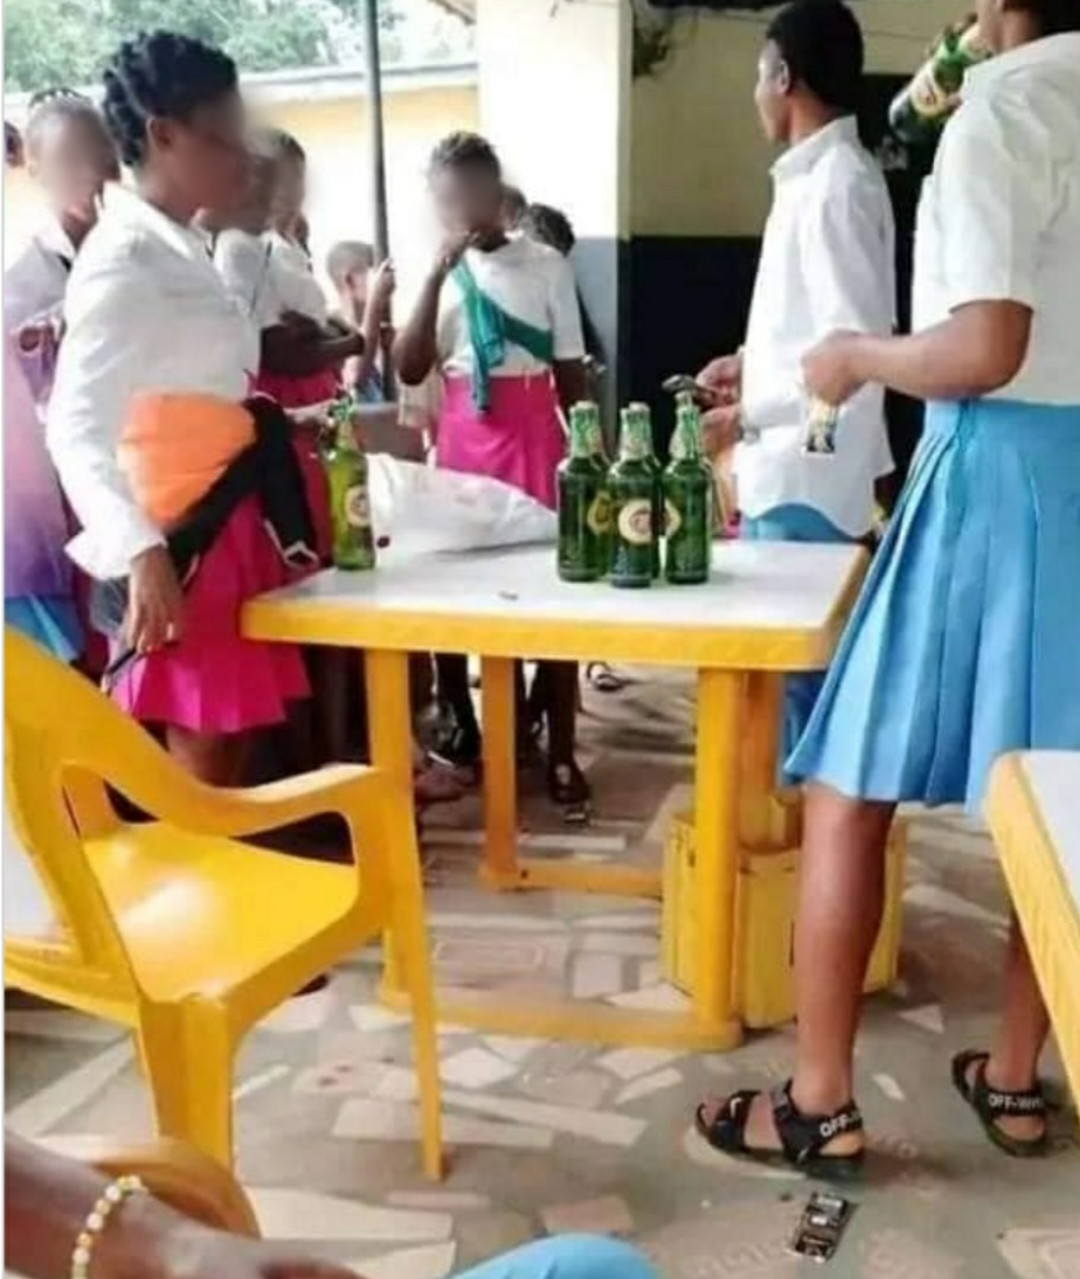 Secondary school students celebrate end of WAEC exams in beer parlour 